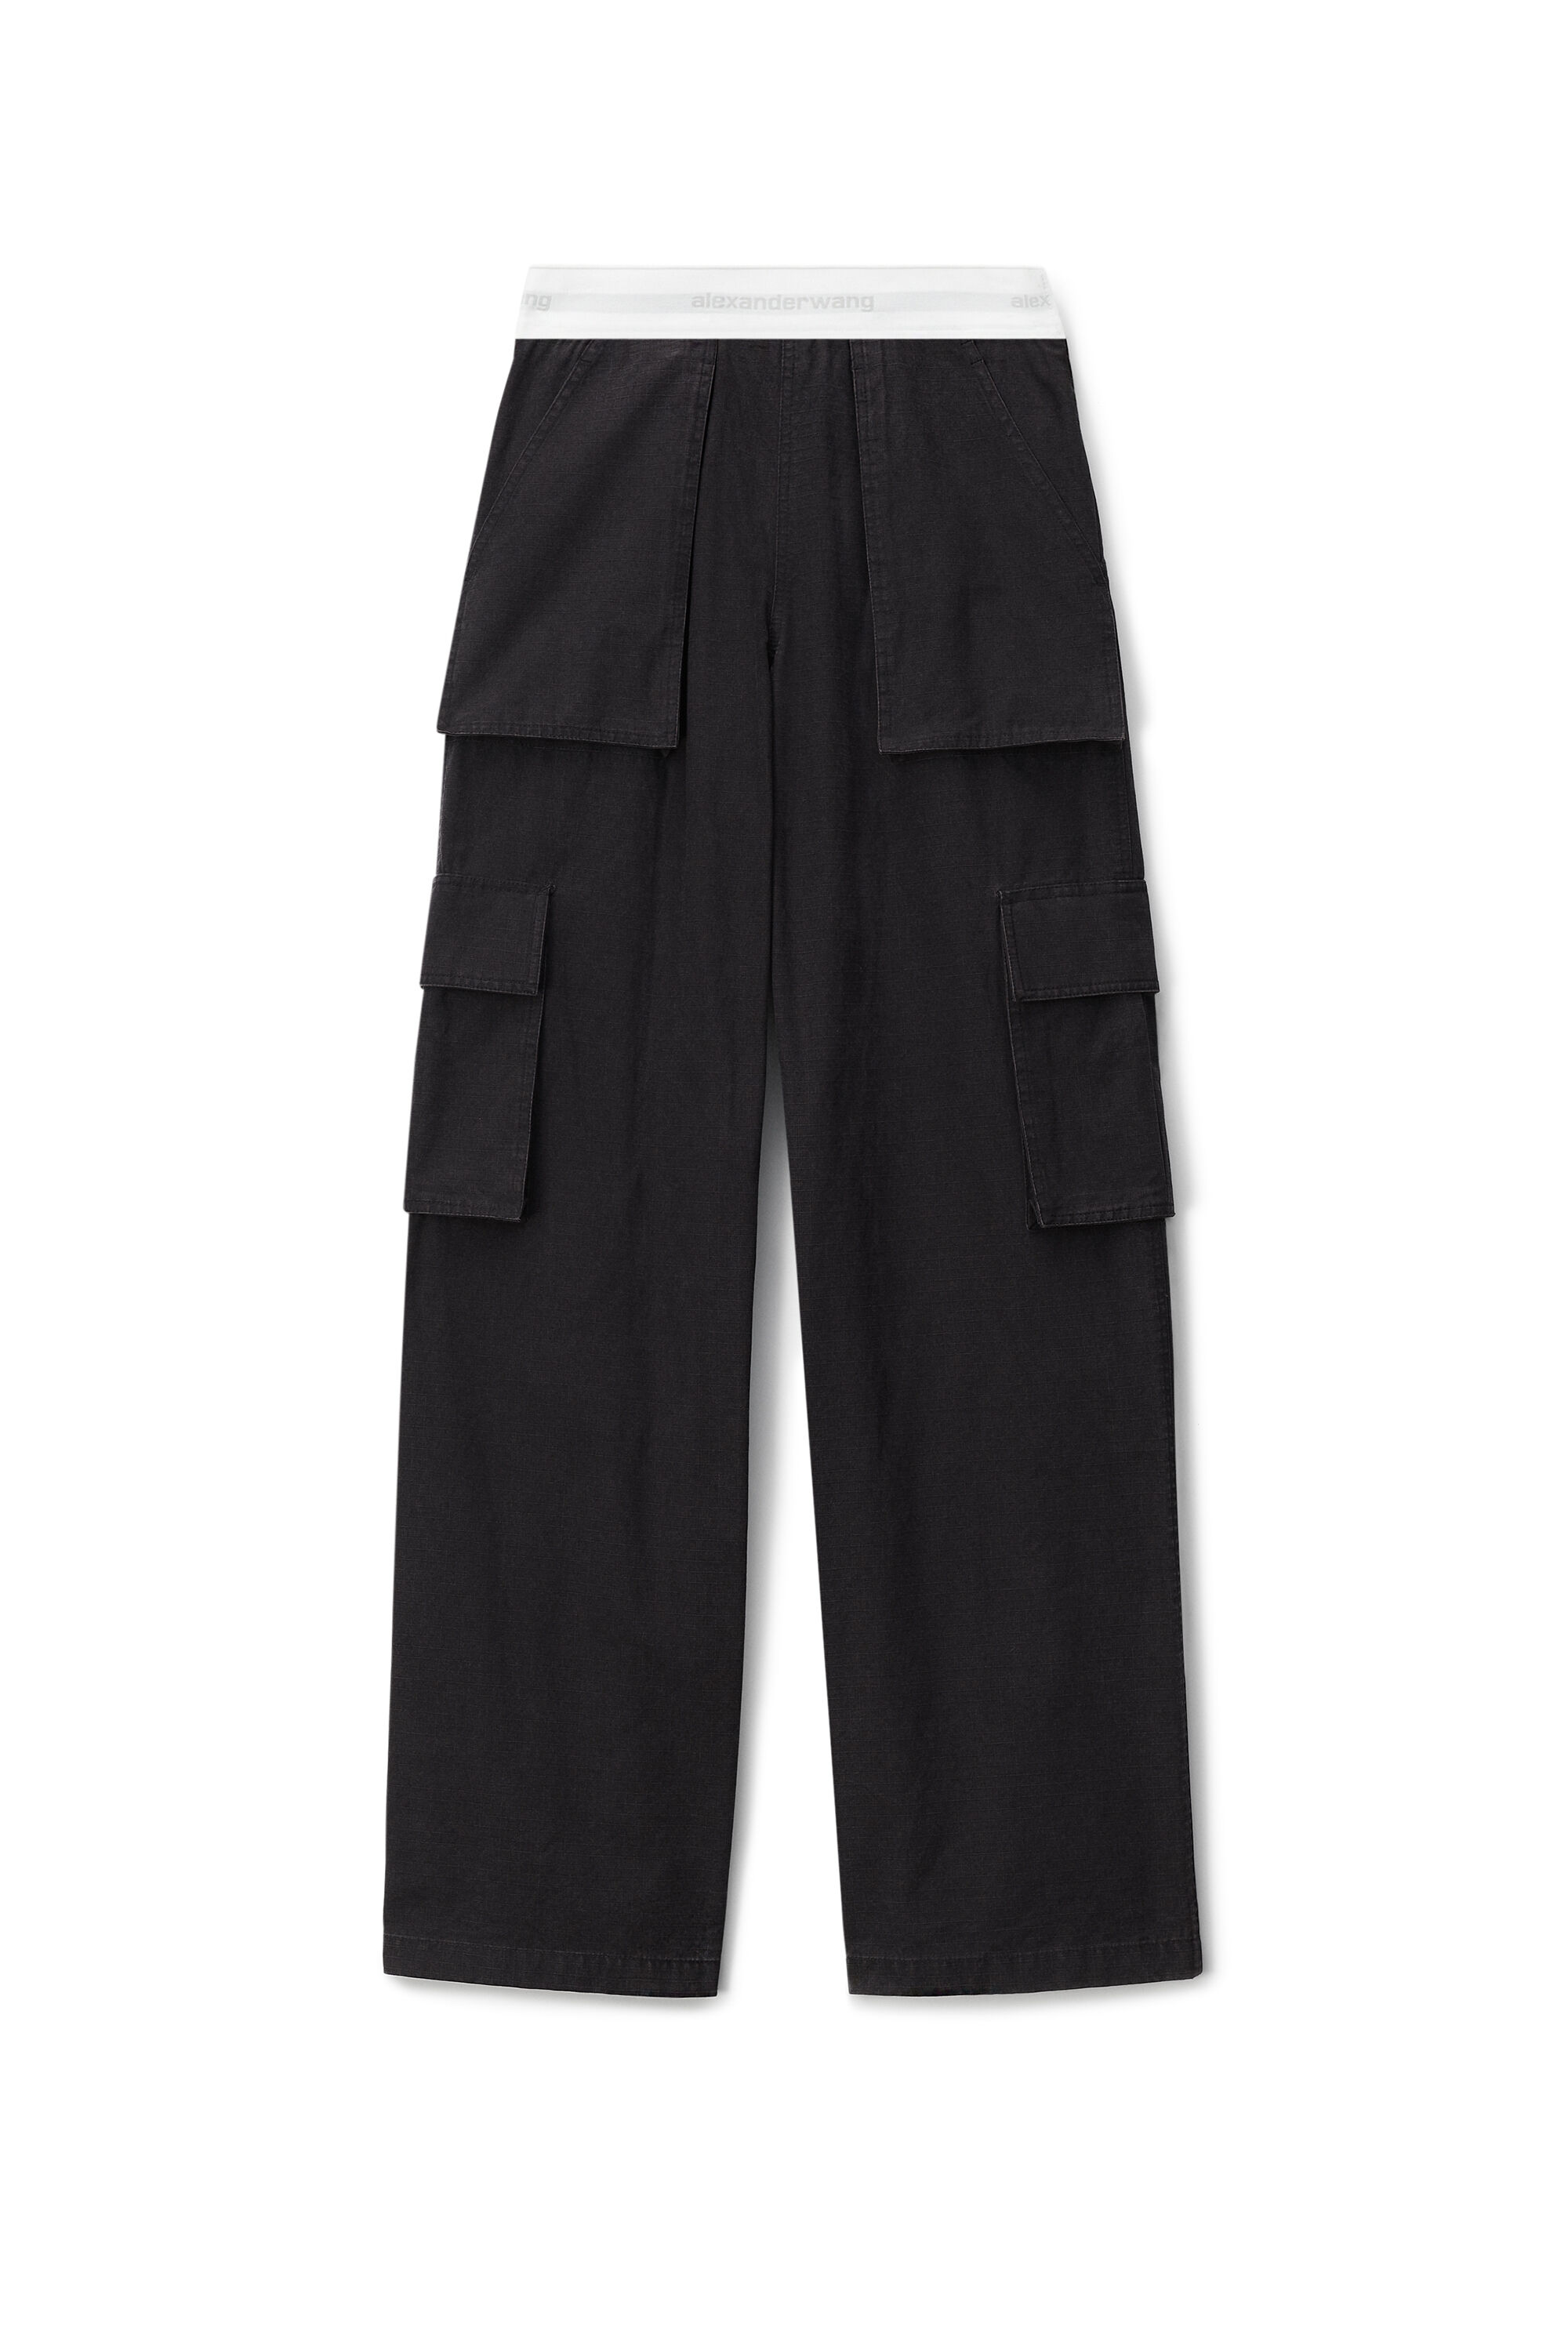 LOGO CARGO PANT IN RIPSTOP COTTON in BLACK ICE | oversized fit 